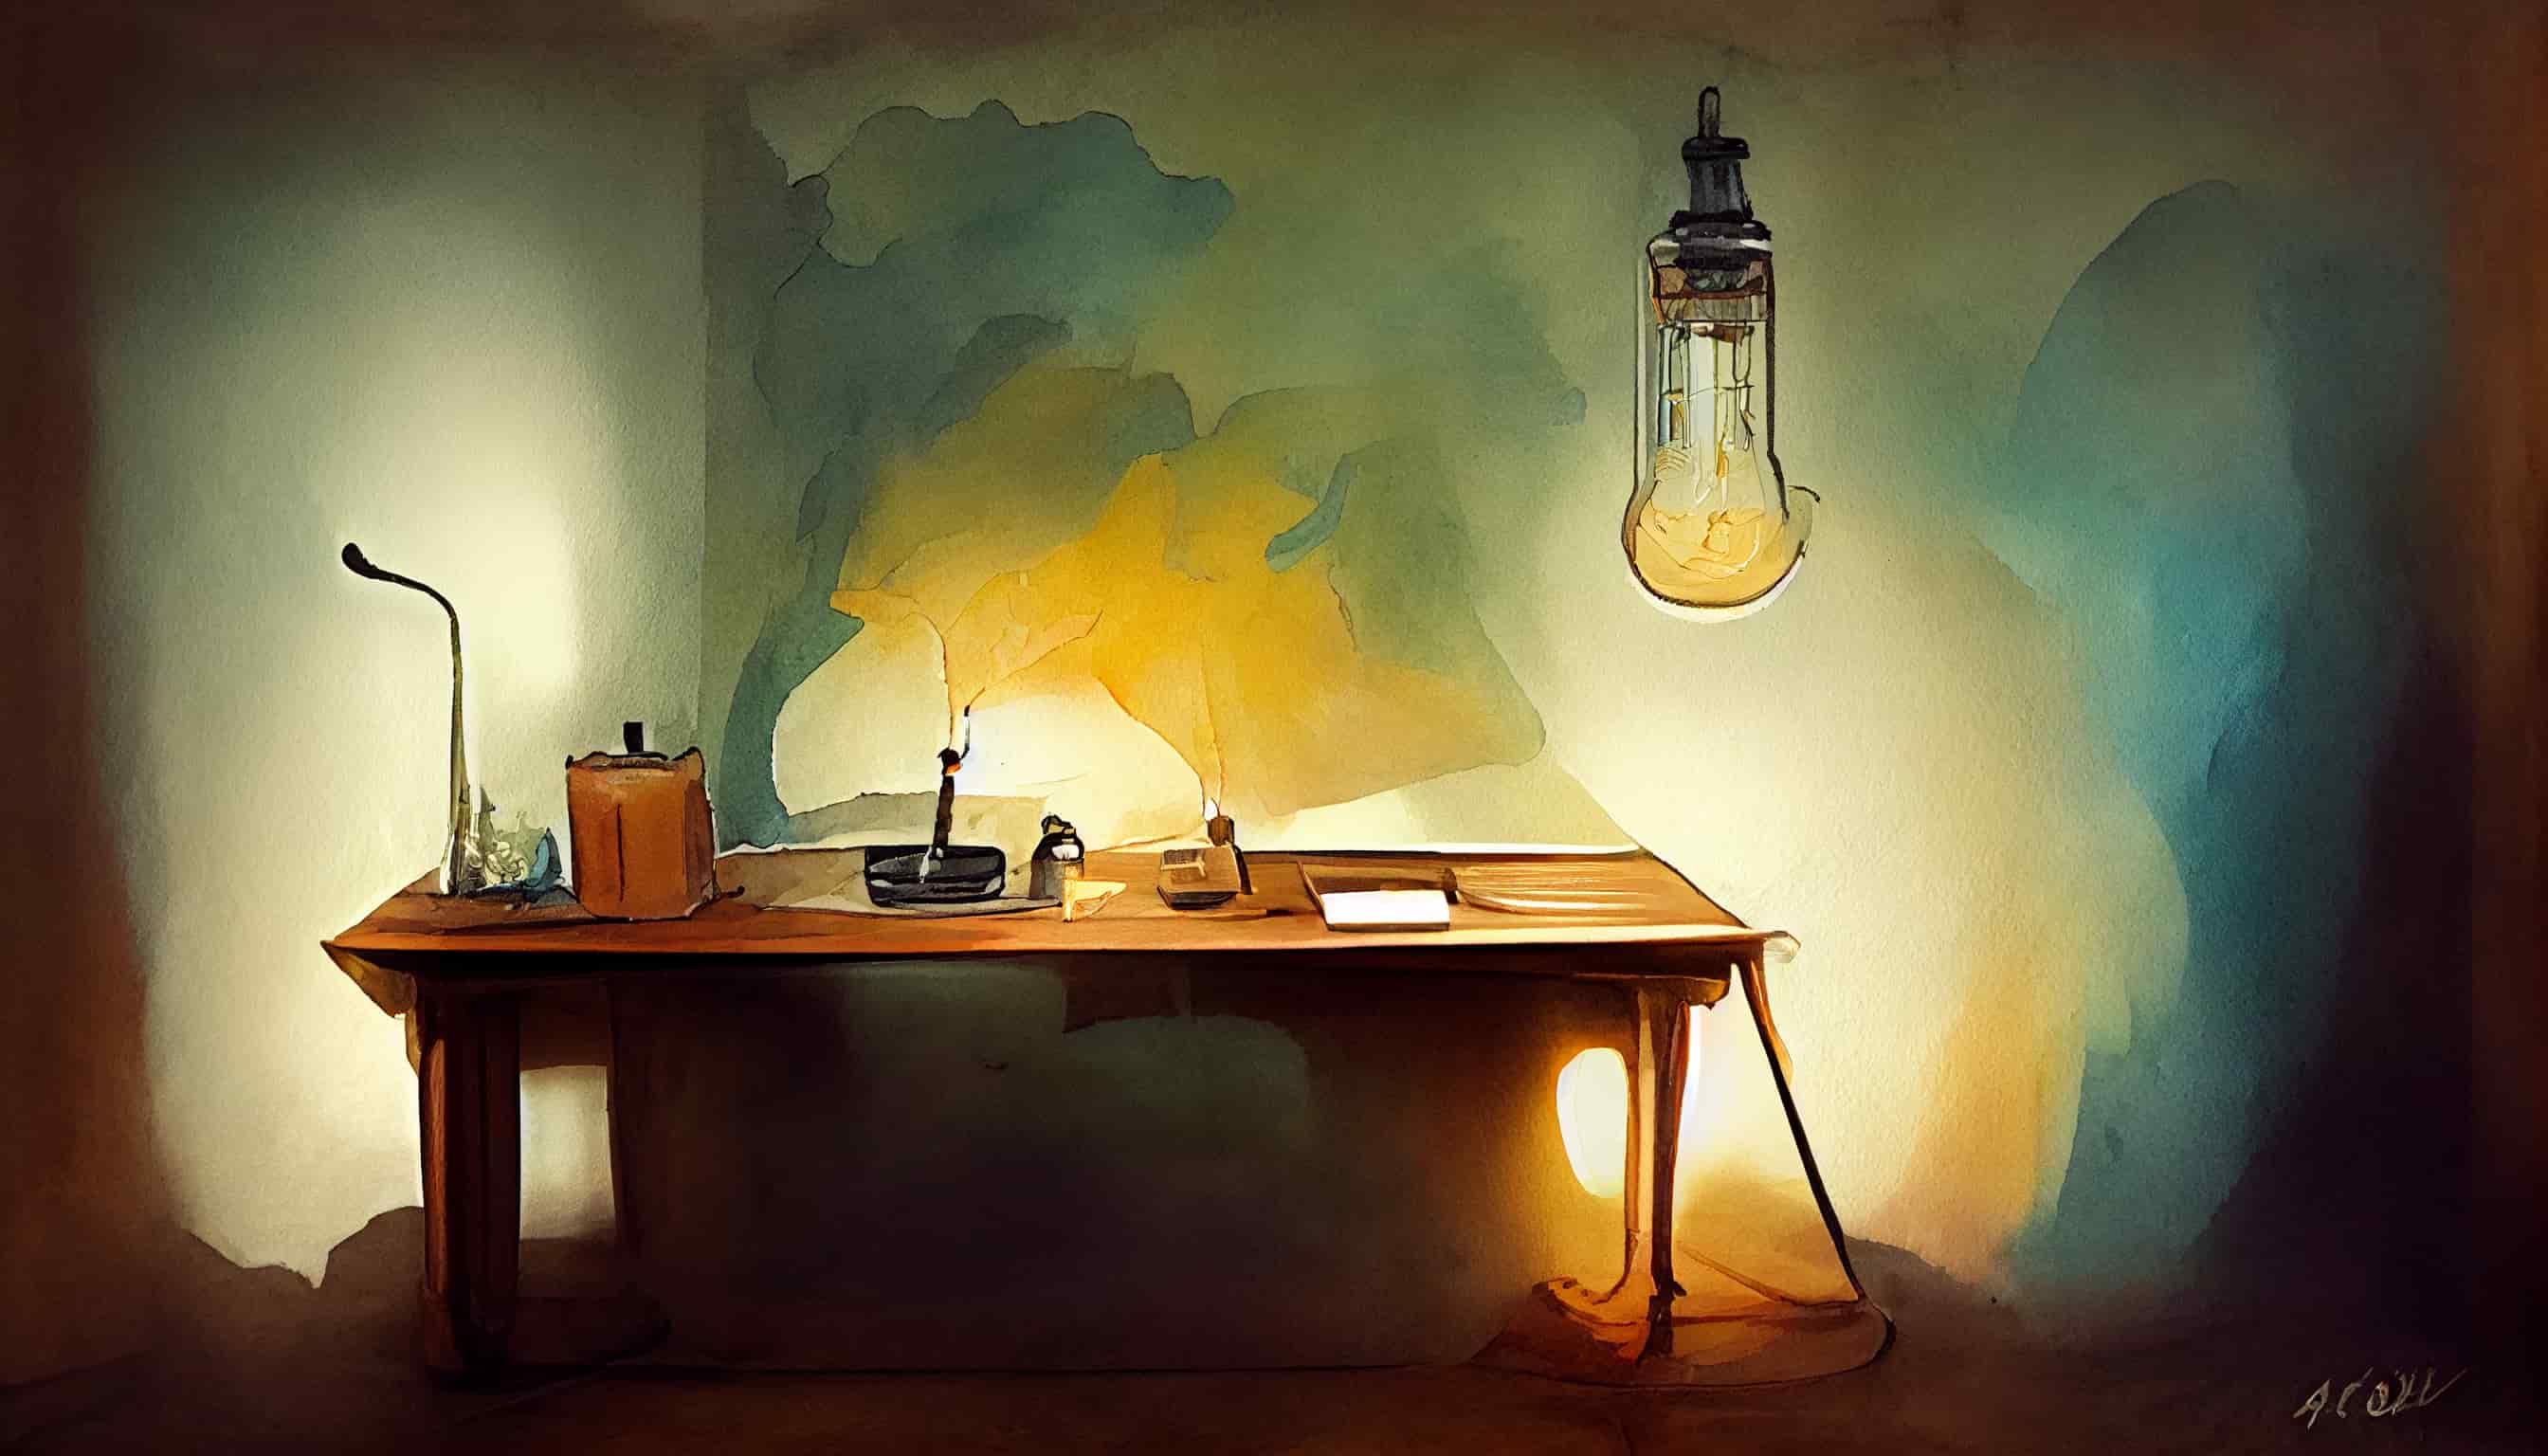 watercolor desk in a dark room with a lamp with an edison light bulb giving light